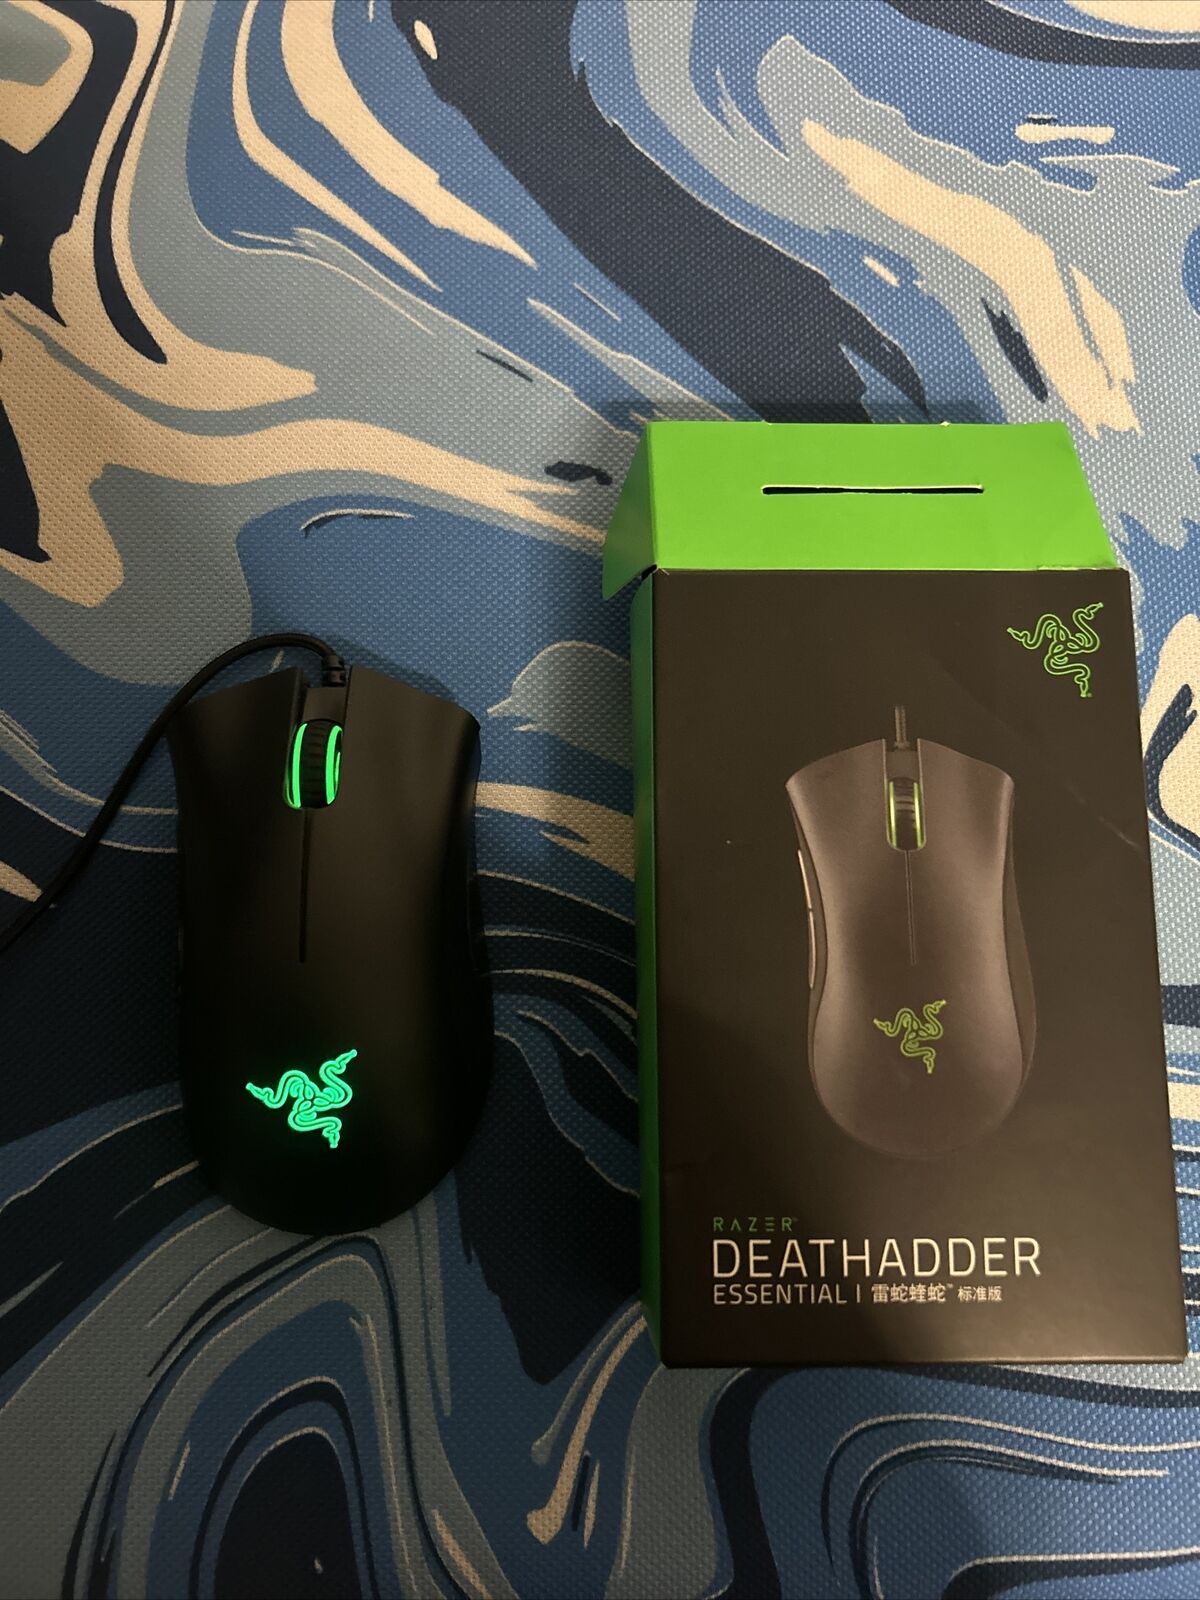 Razer DeathAdder Essential Wired Optical Gaming Mouse - Classic Black...